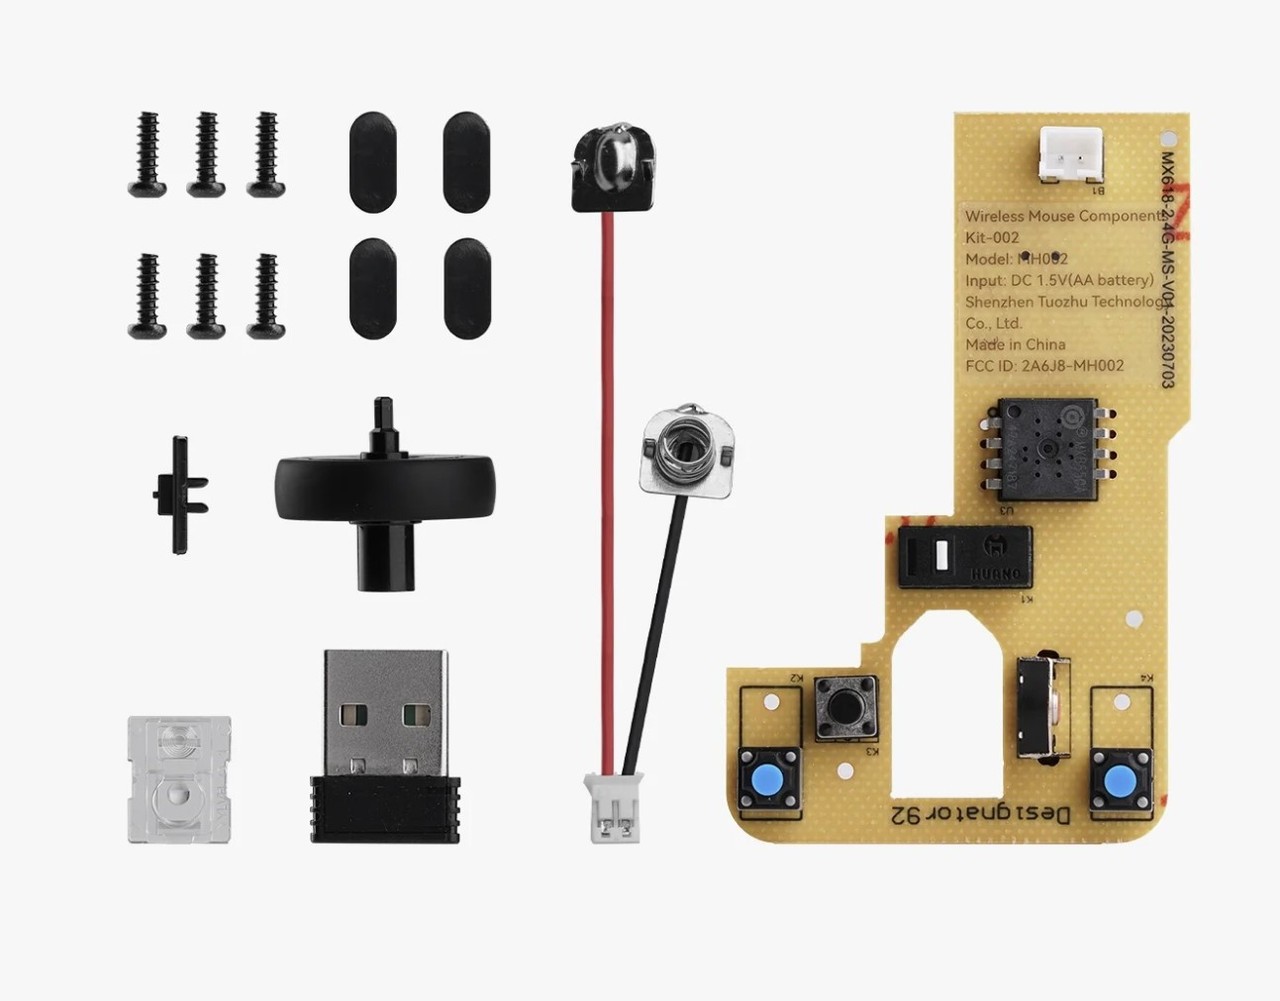 Wireless Mouse Components Kit 002 - фото 3 - id-p115896753